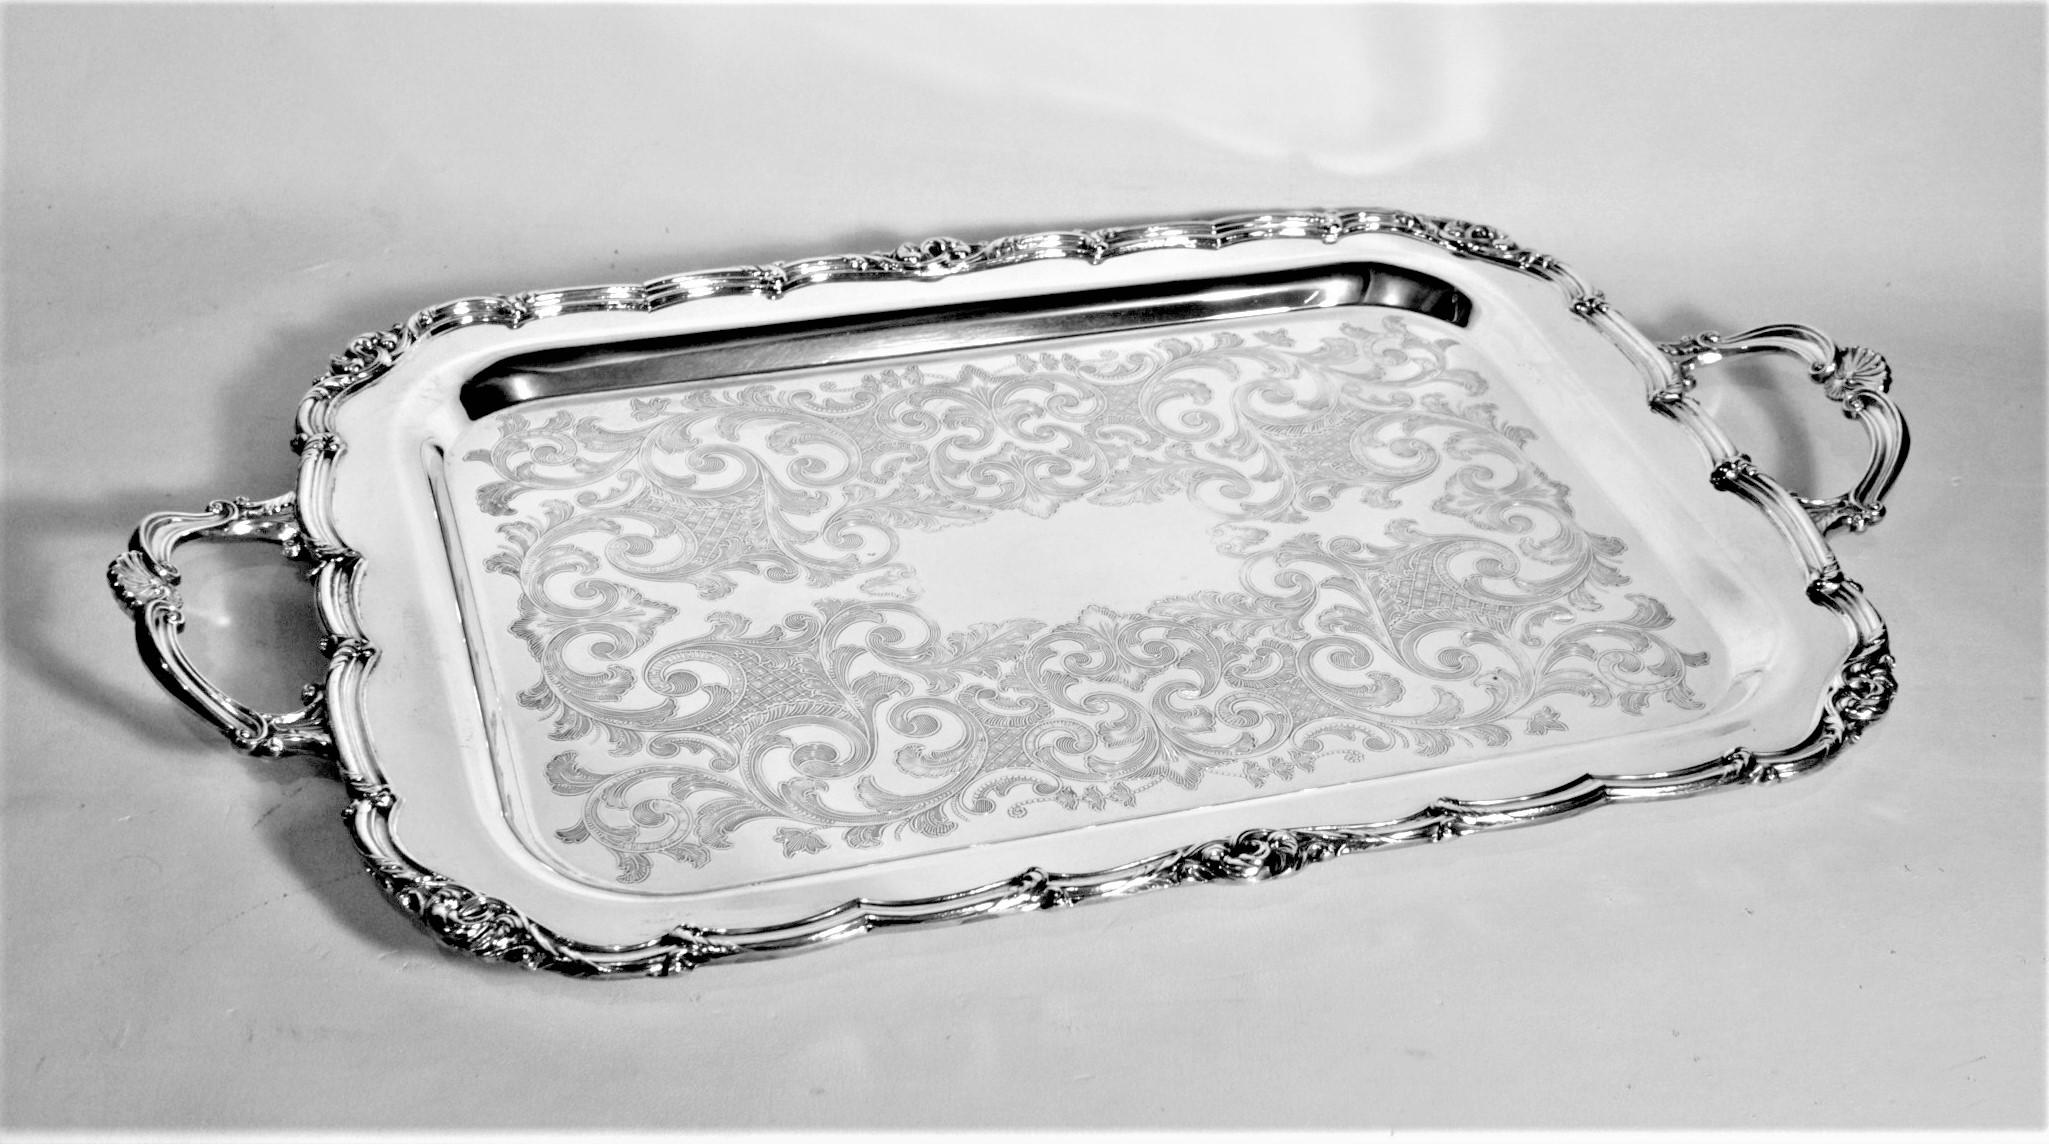 This small antique styled silver plated serving tray is hallmarked by an unknown maker, but originates from Canada from approximately 1950 in an English Victorian style. The rectangular shaped tray has a nicely scalloped outer rim with complimentary